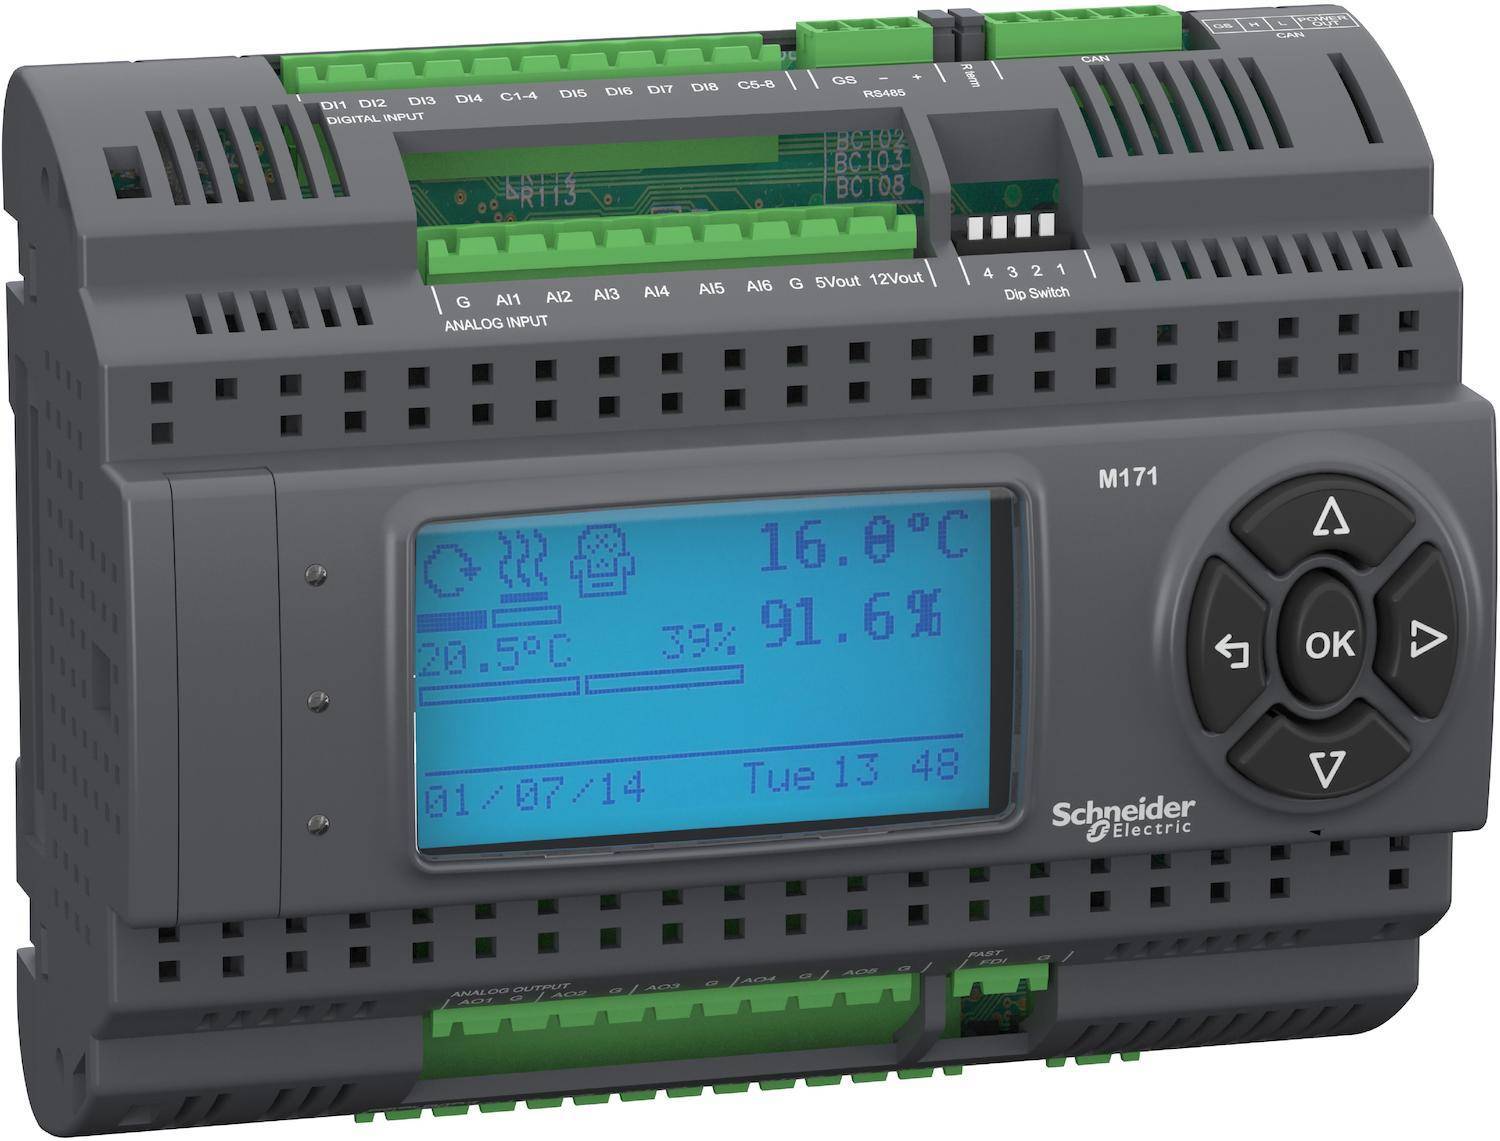 Review of the best programmable logic controllers for 2022